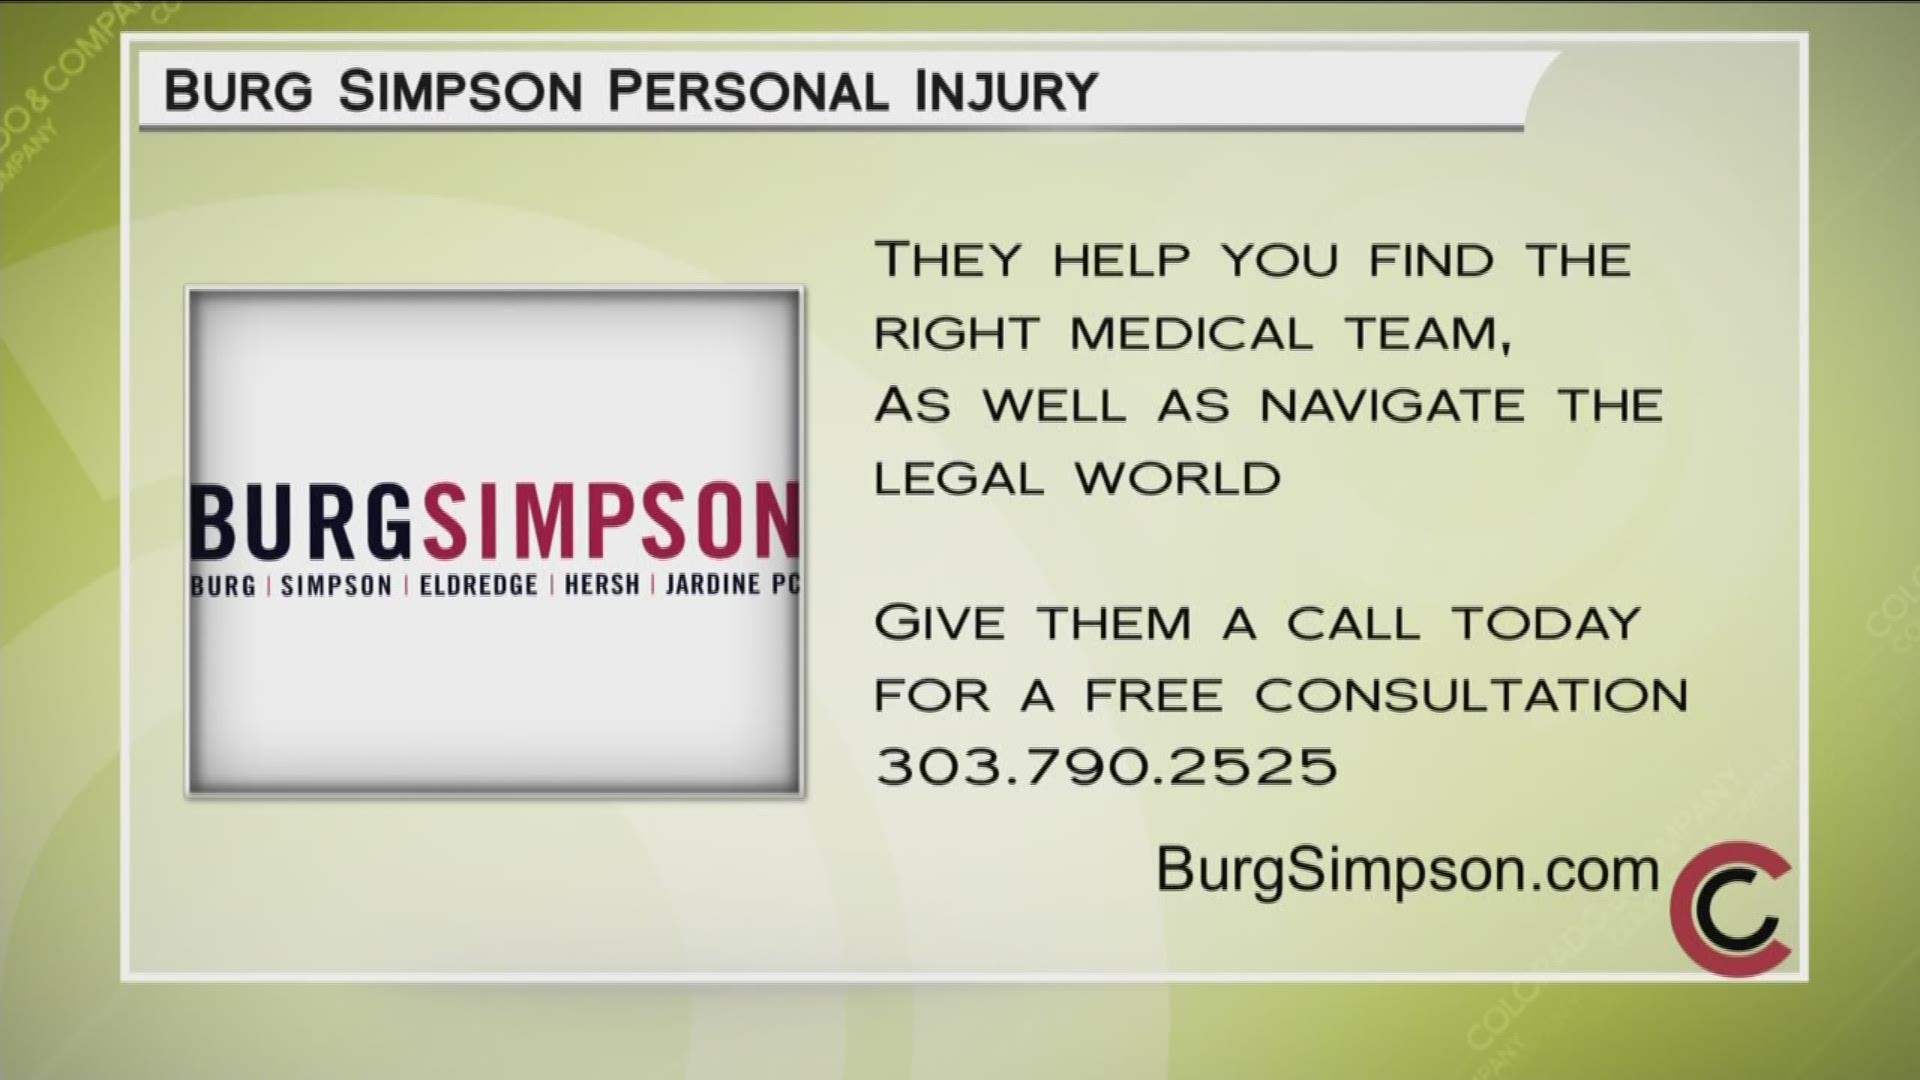 Burg Simpson’s Colorado Personal Injury Lawyers are happy to help in your personal injury case. Contact us today at 303-790-2525.   Learn more at www.BurgSimpson.com/practice-areas/personal-injury/
THIS INTERVIEW HAS COMMERCIAL CONTENT. PRODUCTS AND SERVICES FEATURED APPEAR AS PAID ADVERTISING.